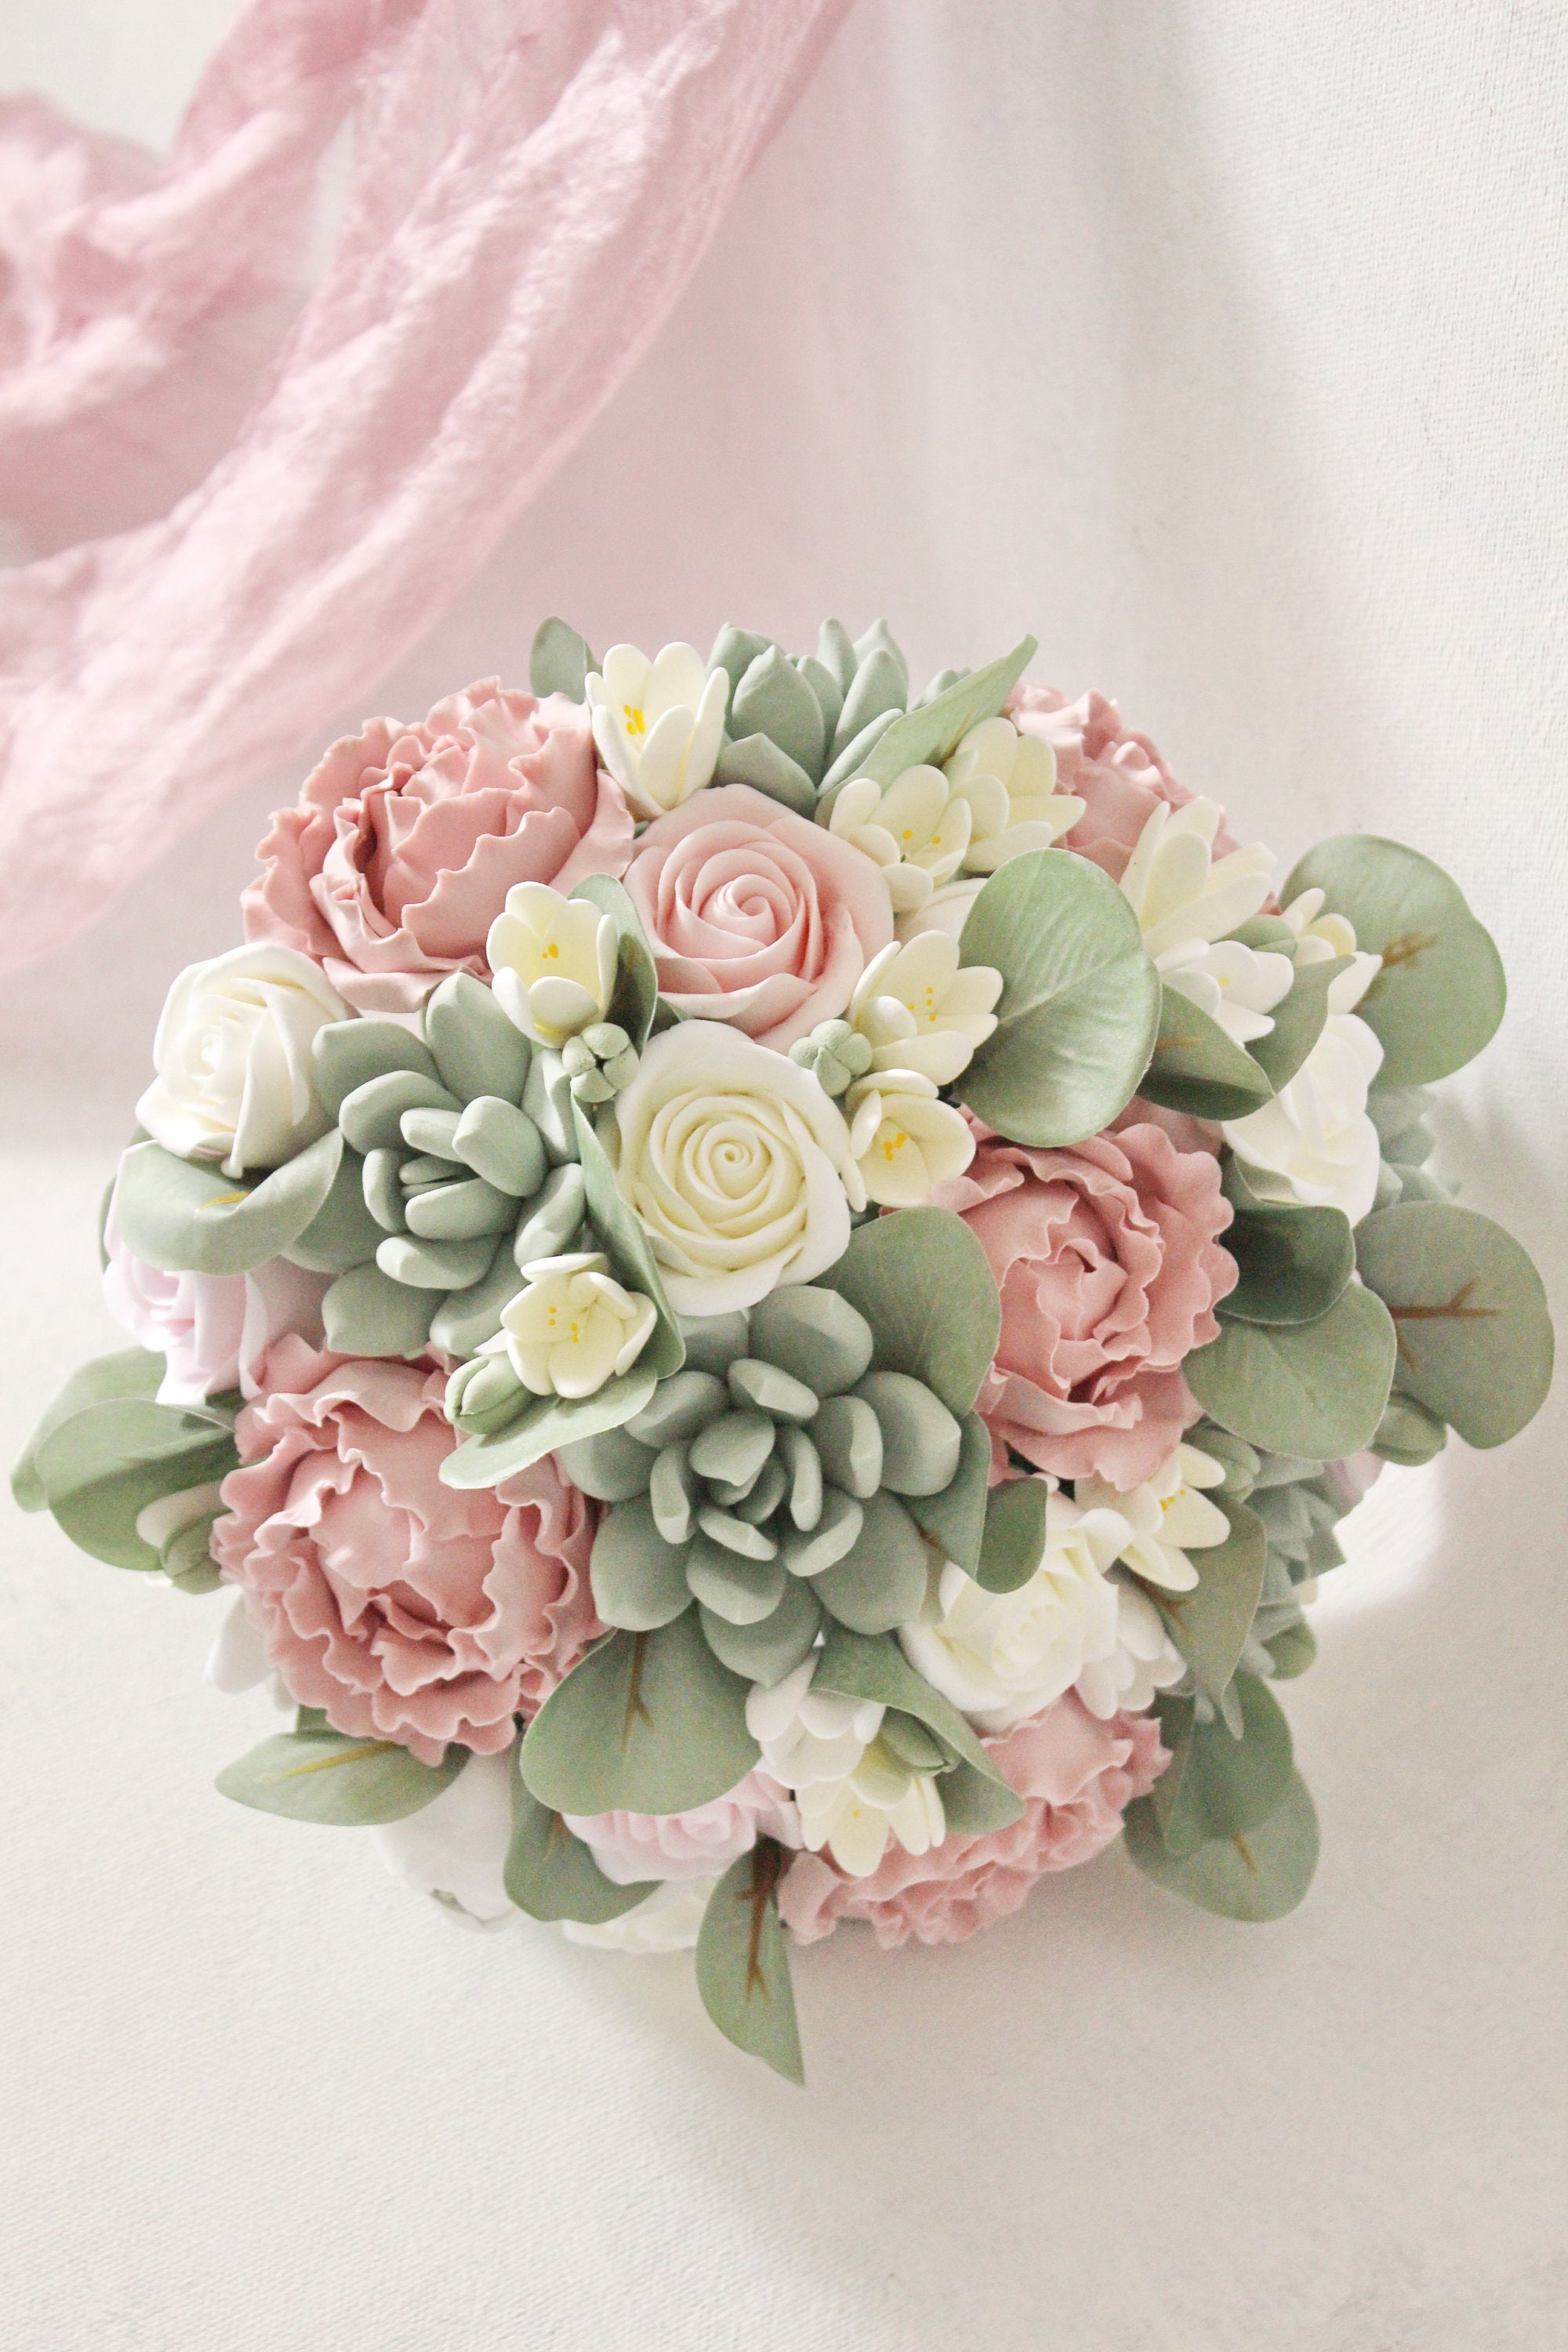 Peonies Succulent Bouquet; Pink Ivory Green Wedding Bouquet; Silk Wedding Flowers with Roses Succulent; Bridal Bouquet Pastel Colors